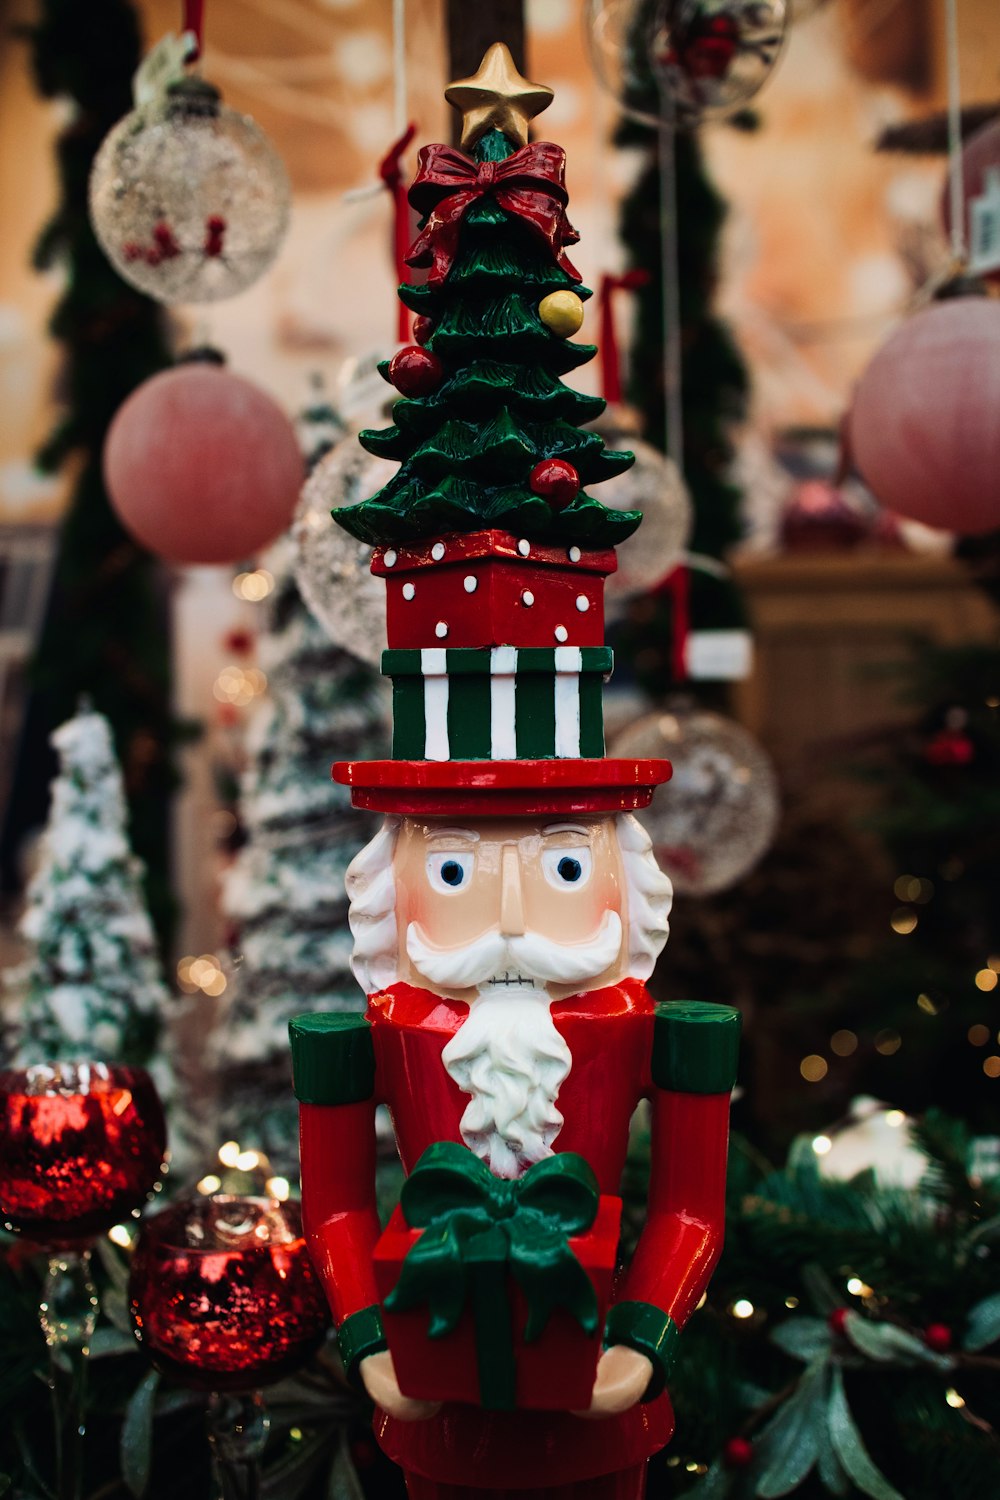 red and white snowman figurine